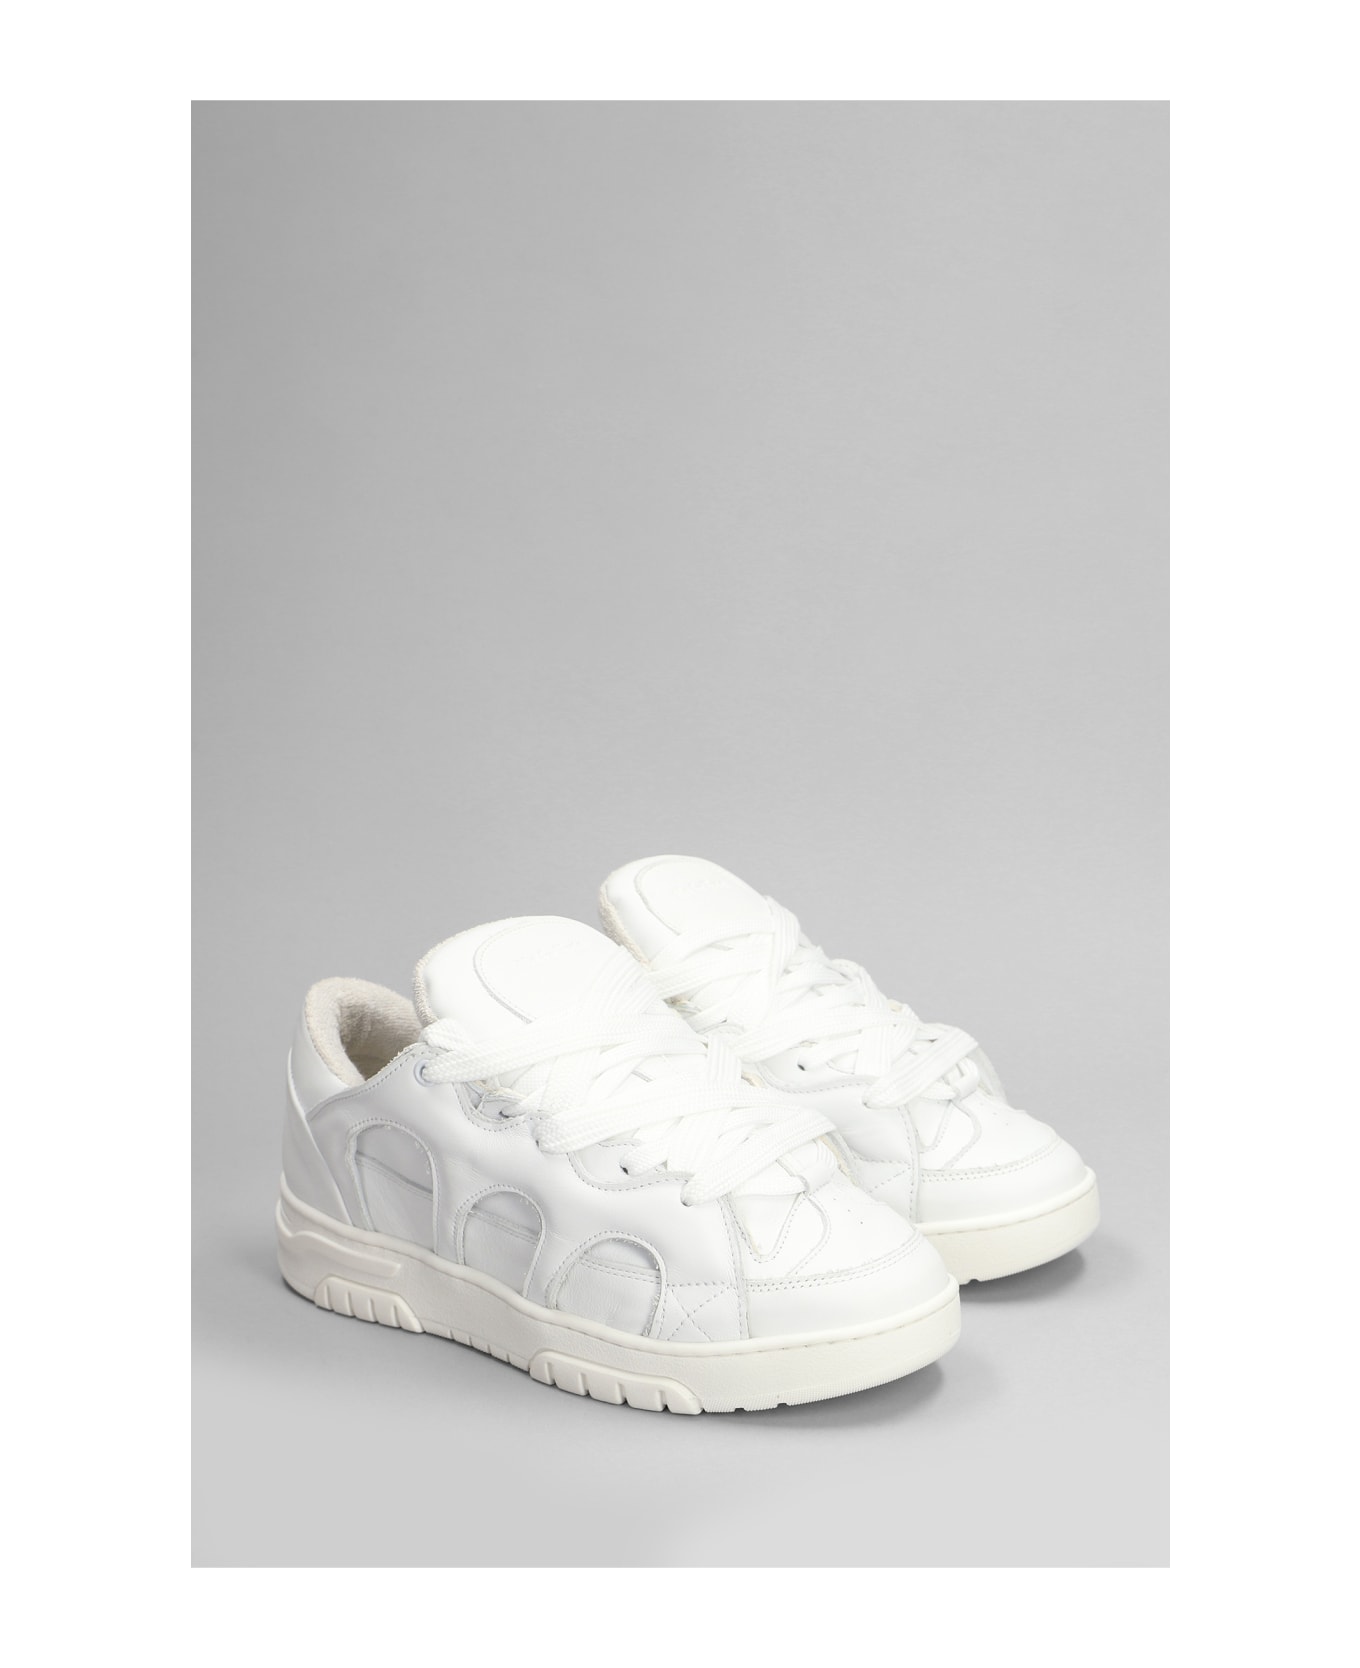 Paura Santha 1 Sneakers In White Leather - white